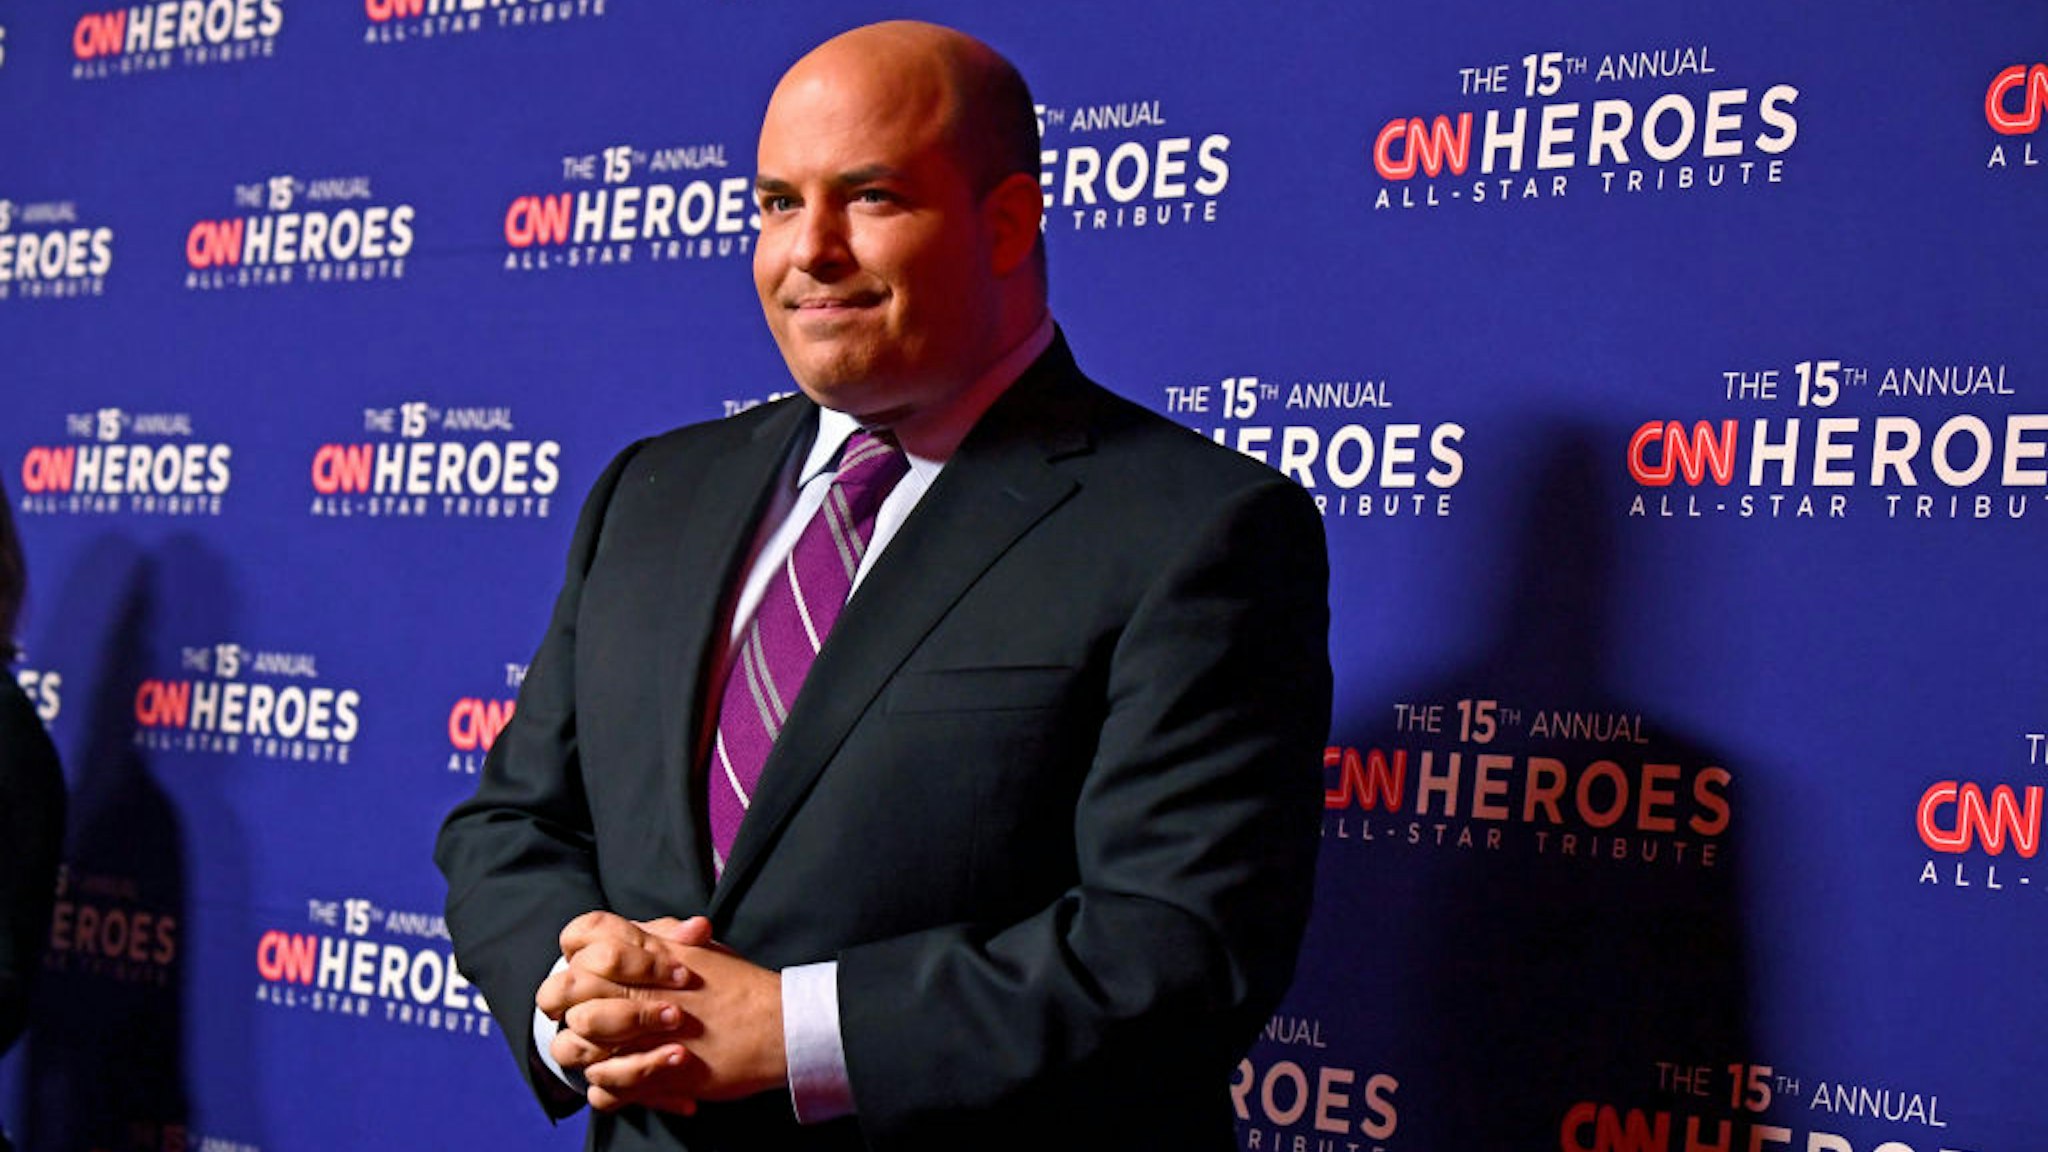 NEW YORK, NEW YORK - DECEMBER 12: Brian Stelter attends The 15th Annual CNN Heroes: All-Star Tribute at American Museum of Natural History on December 12, 2021 in New York City. (Photo by Kevin Mazur/Getty Images for CNN. A WarnerMedia Company. All Rights Reserved.)